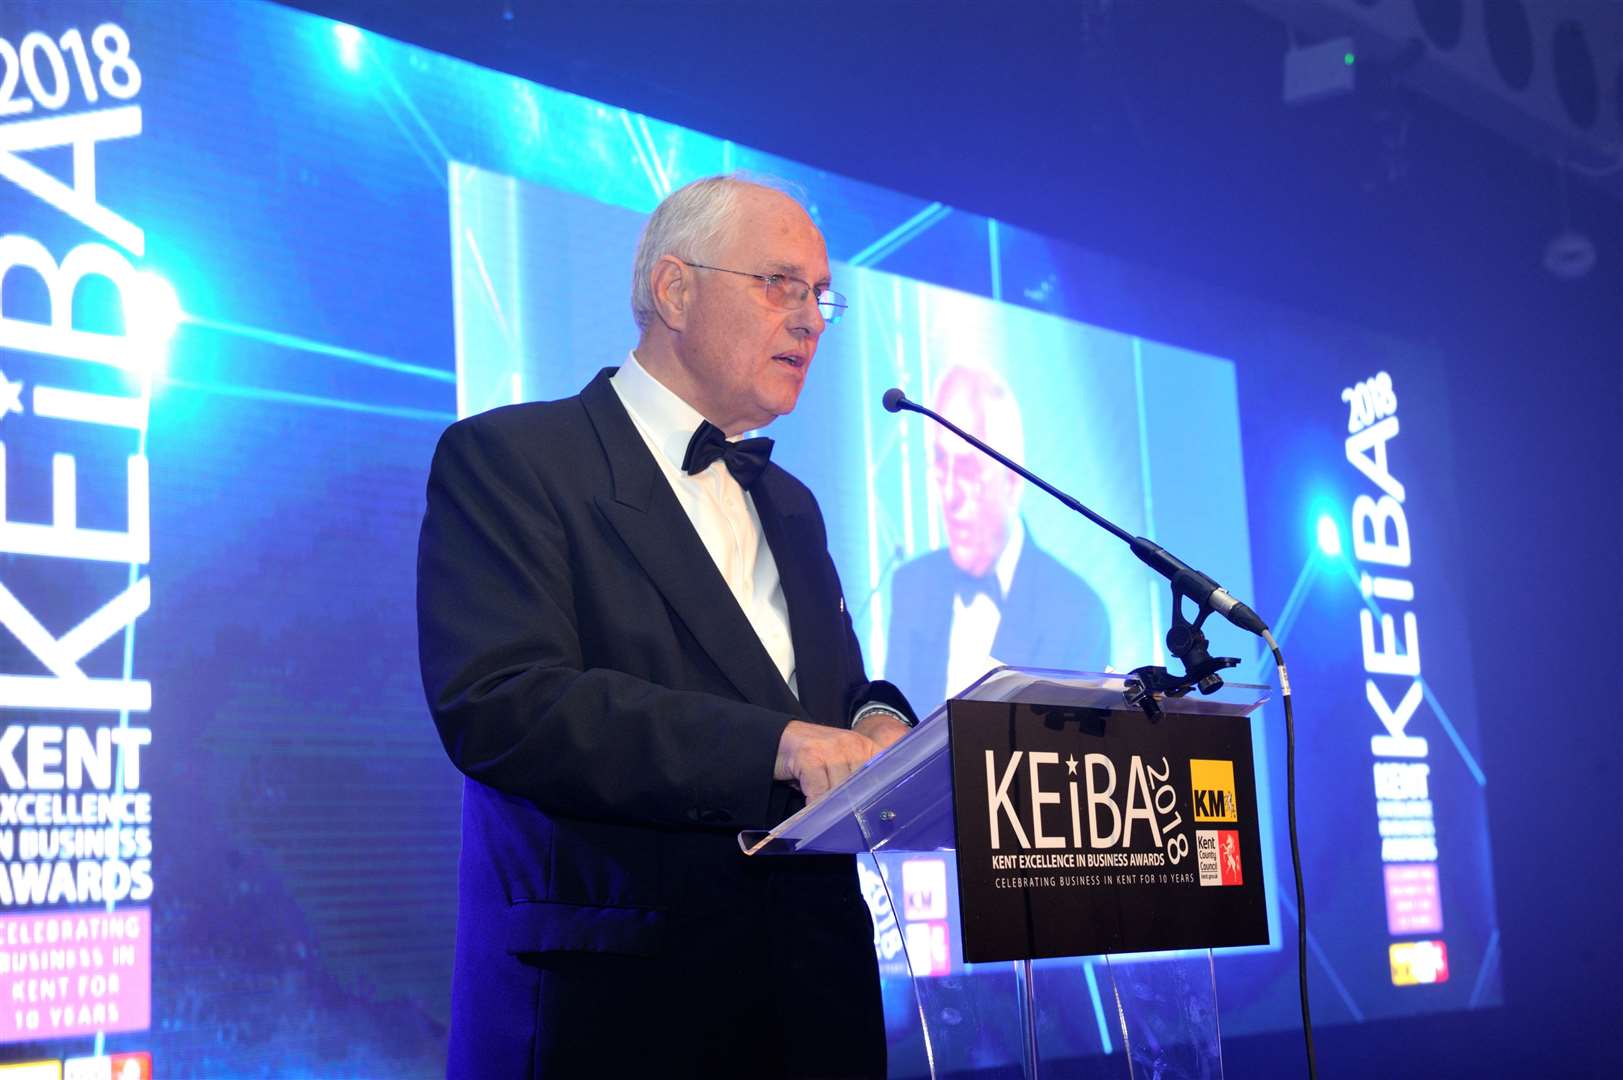 Geoff Miles, chairman of the judging panel for the KEiBAs